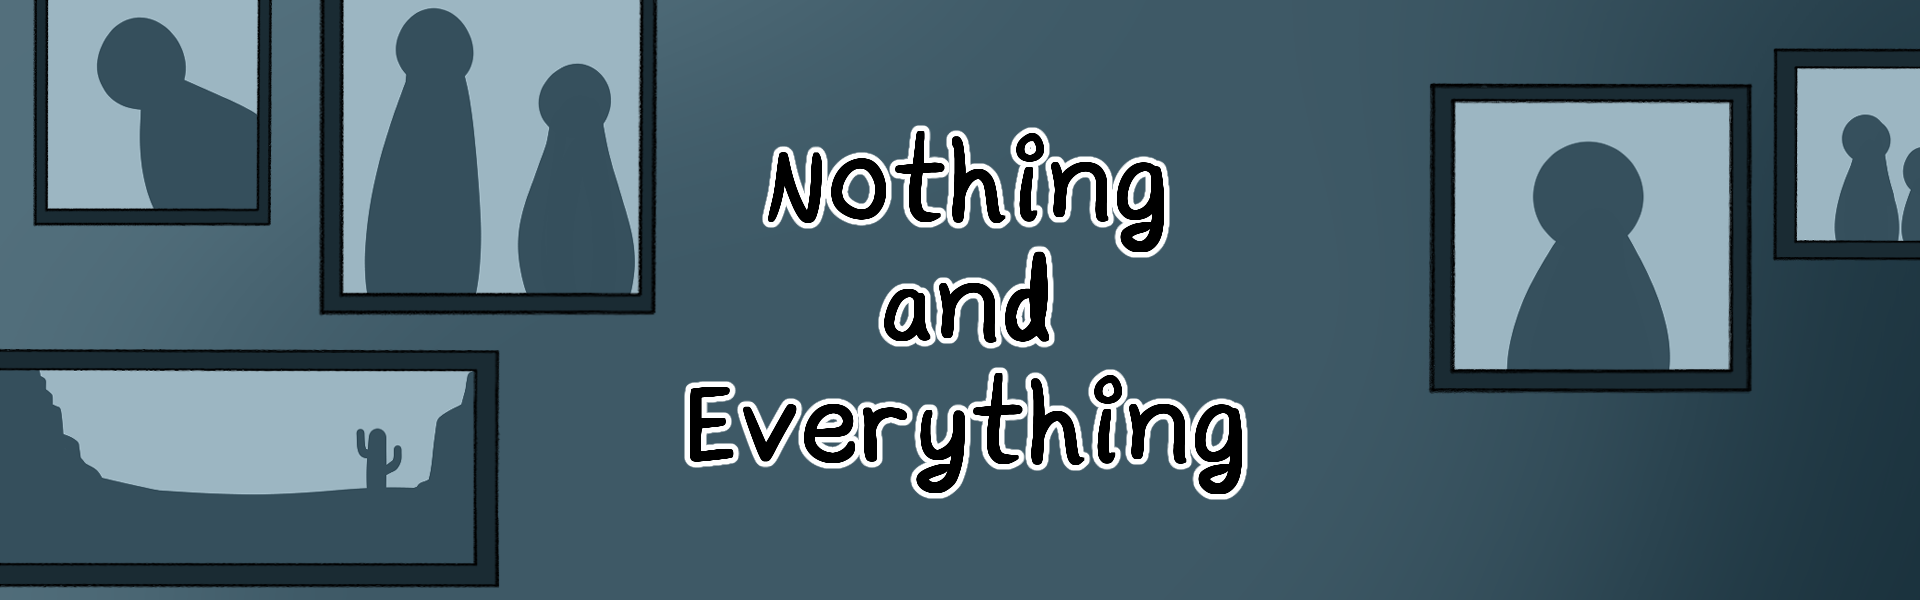 Nothing and Everything